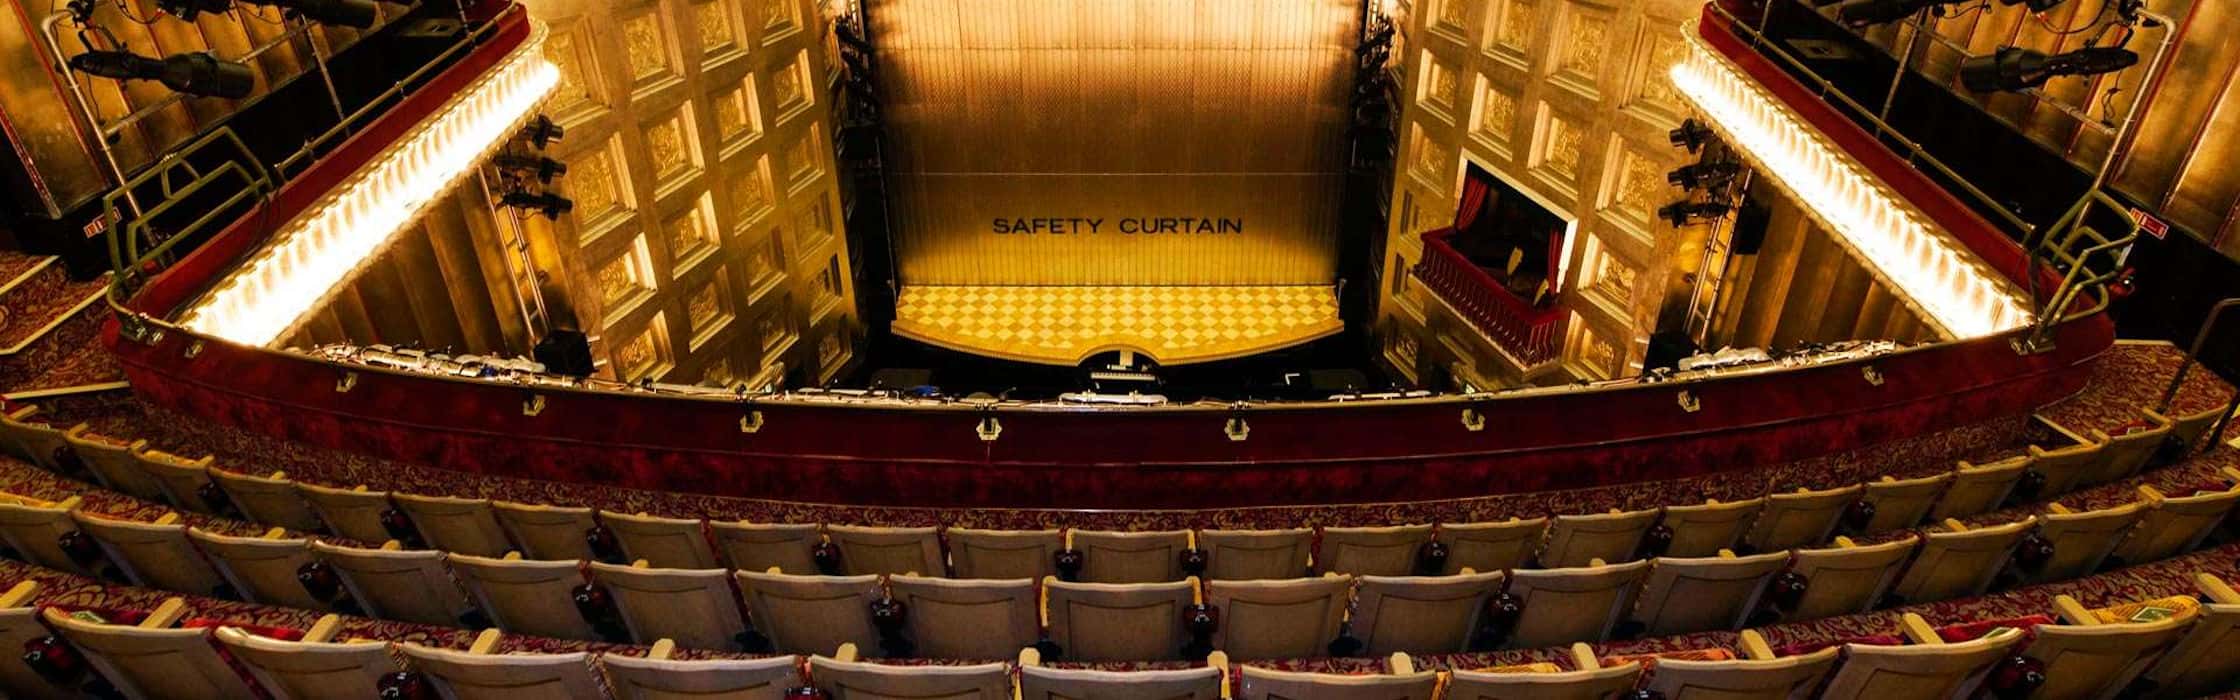 What's On at The Savoy Theatre, London